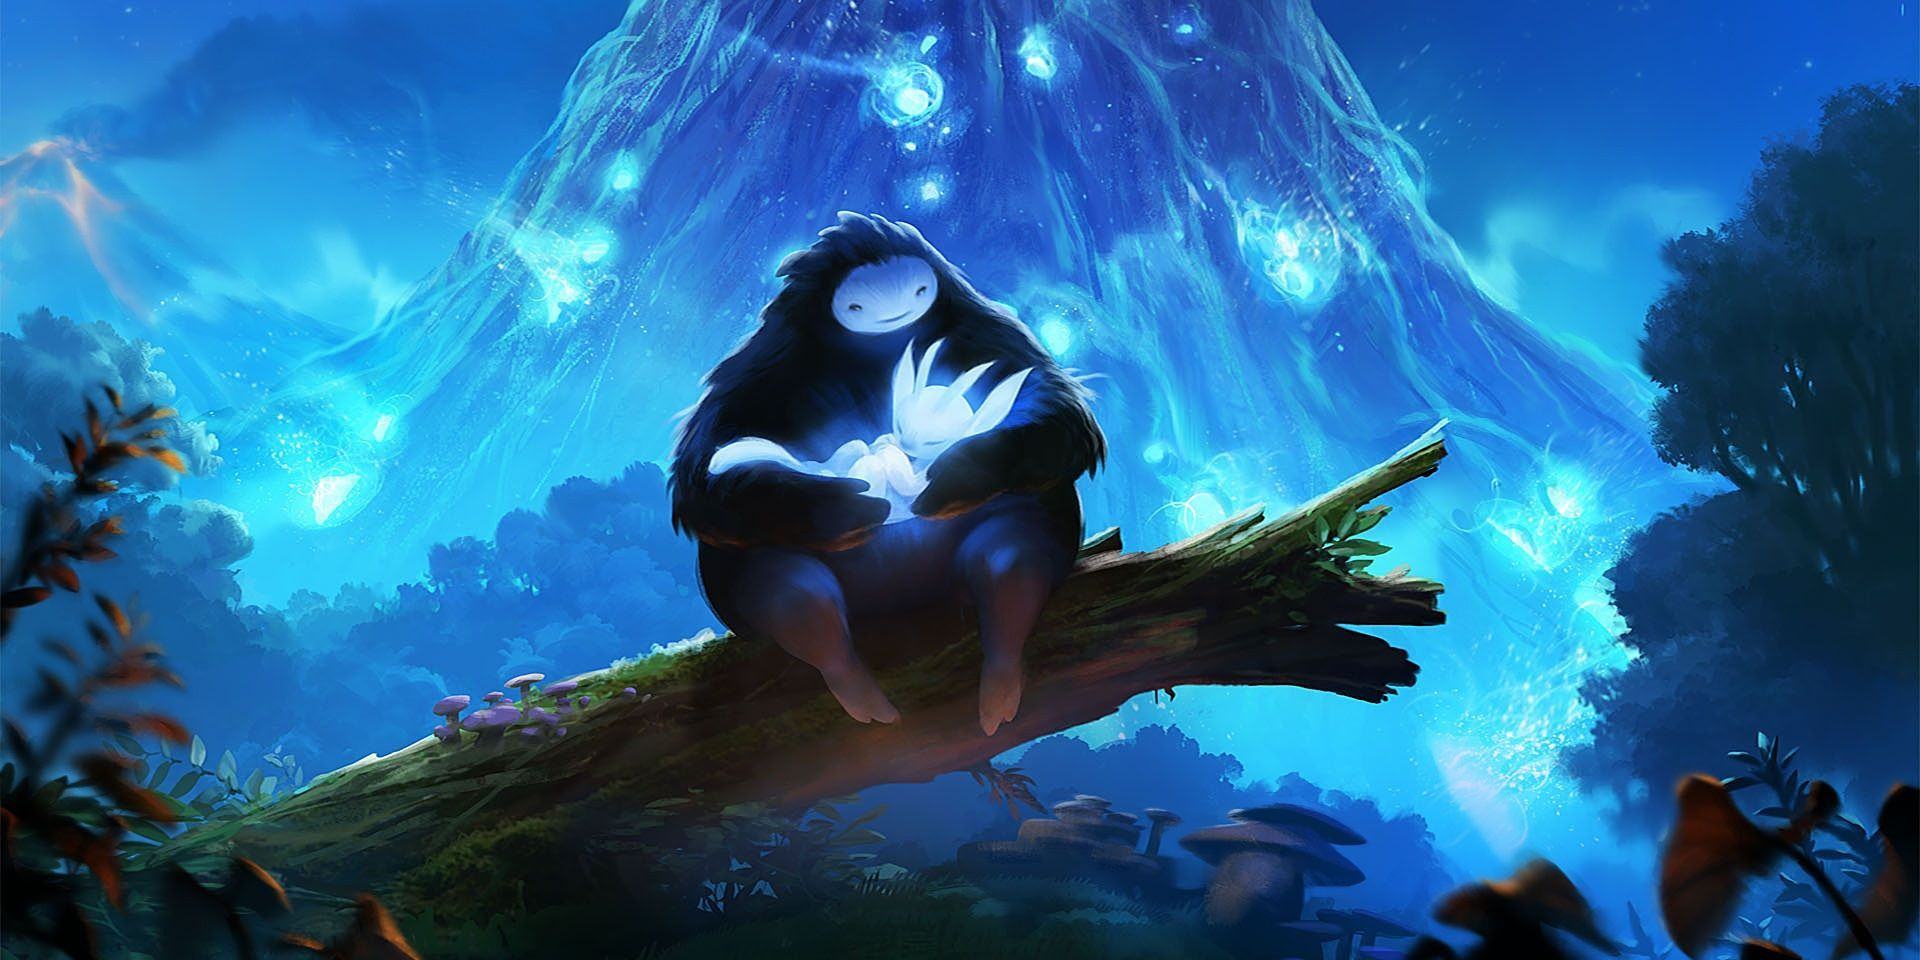 Naru holding a glowing Ori on a fallen tree in The Blind Forest.